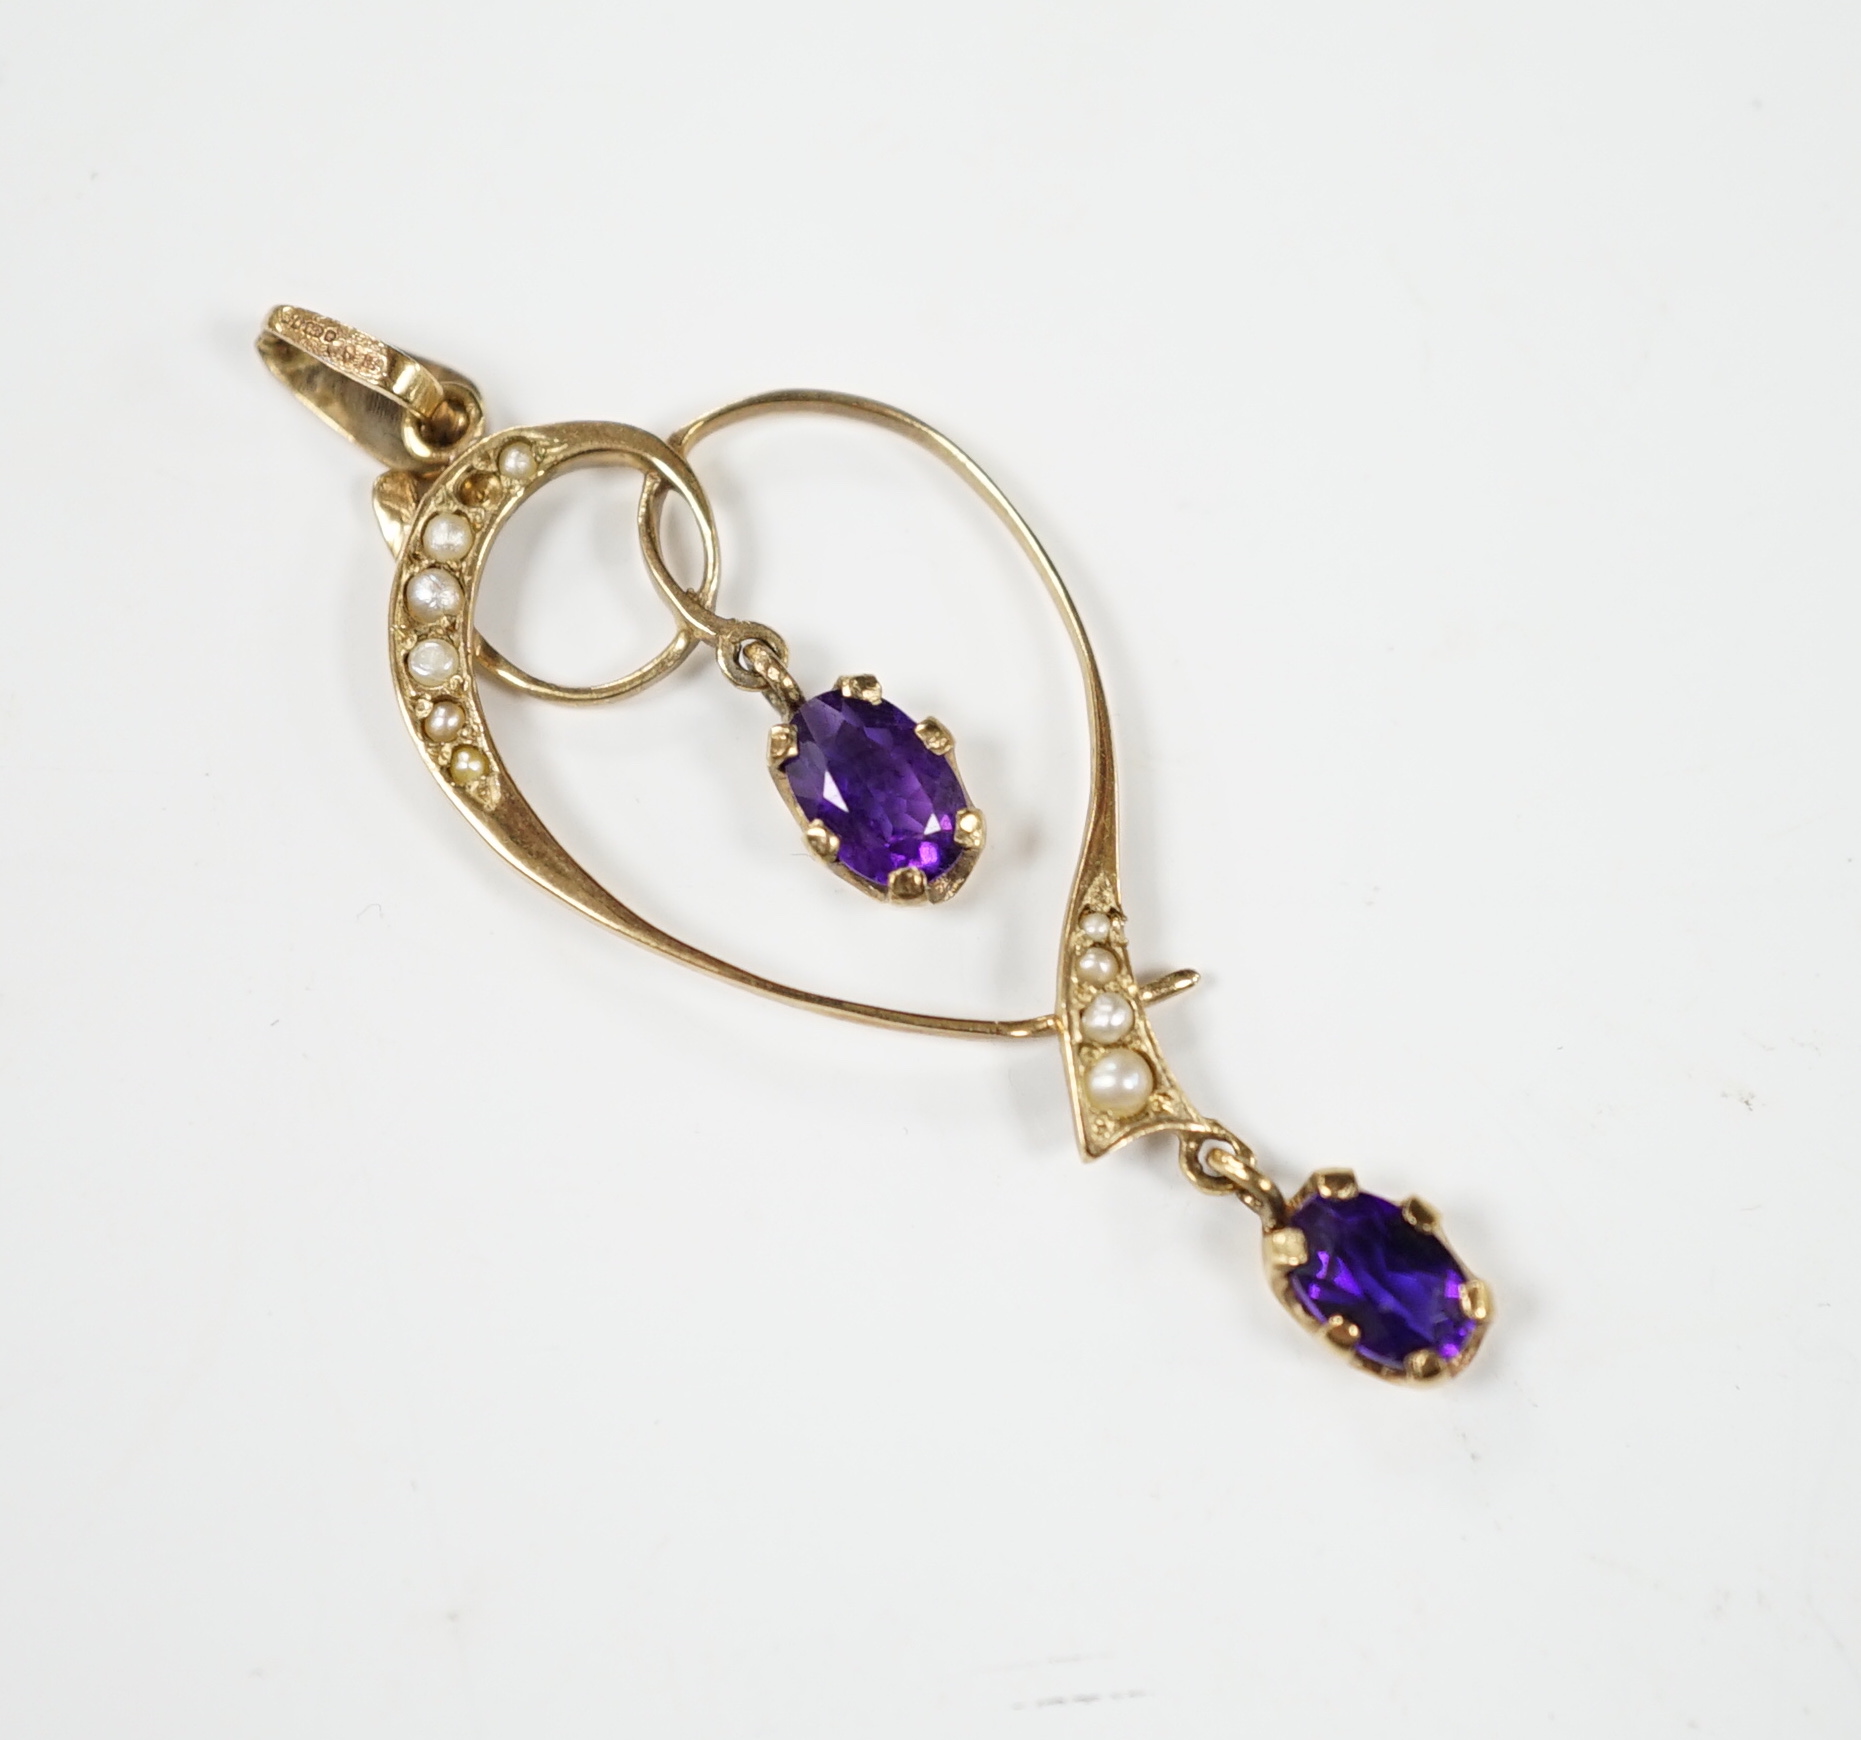 A modern Edwardian style 9ct gold, amethyst and seed pearl set drop pendant, 45mm, gross weight 1.6 grams.